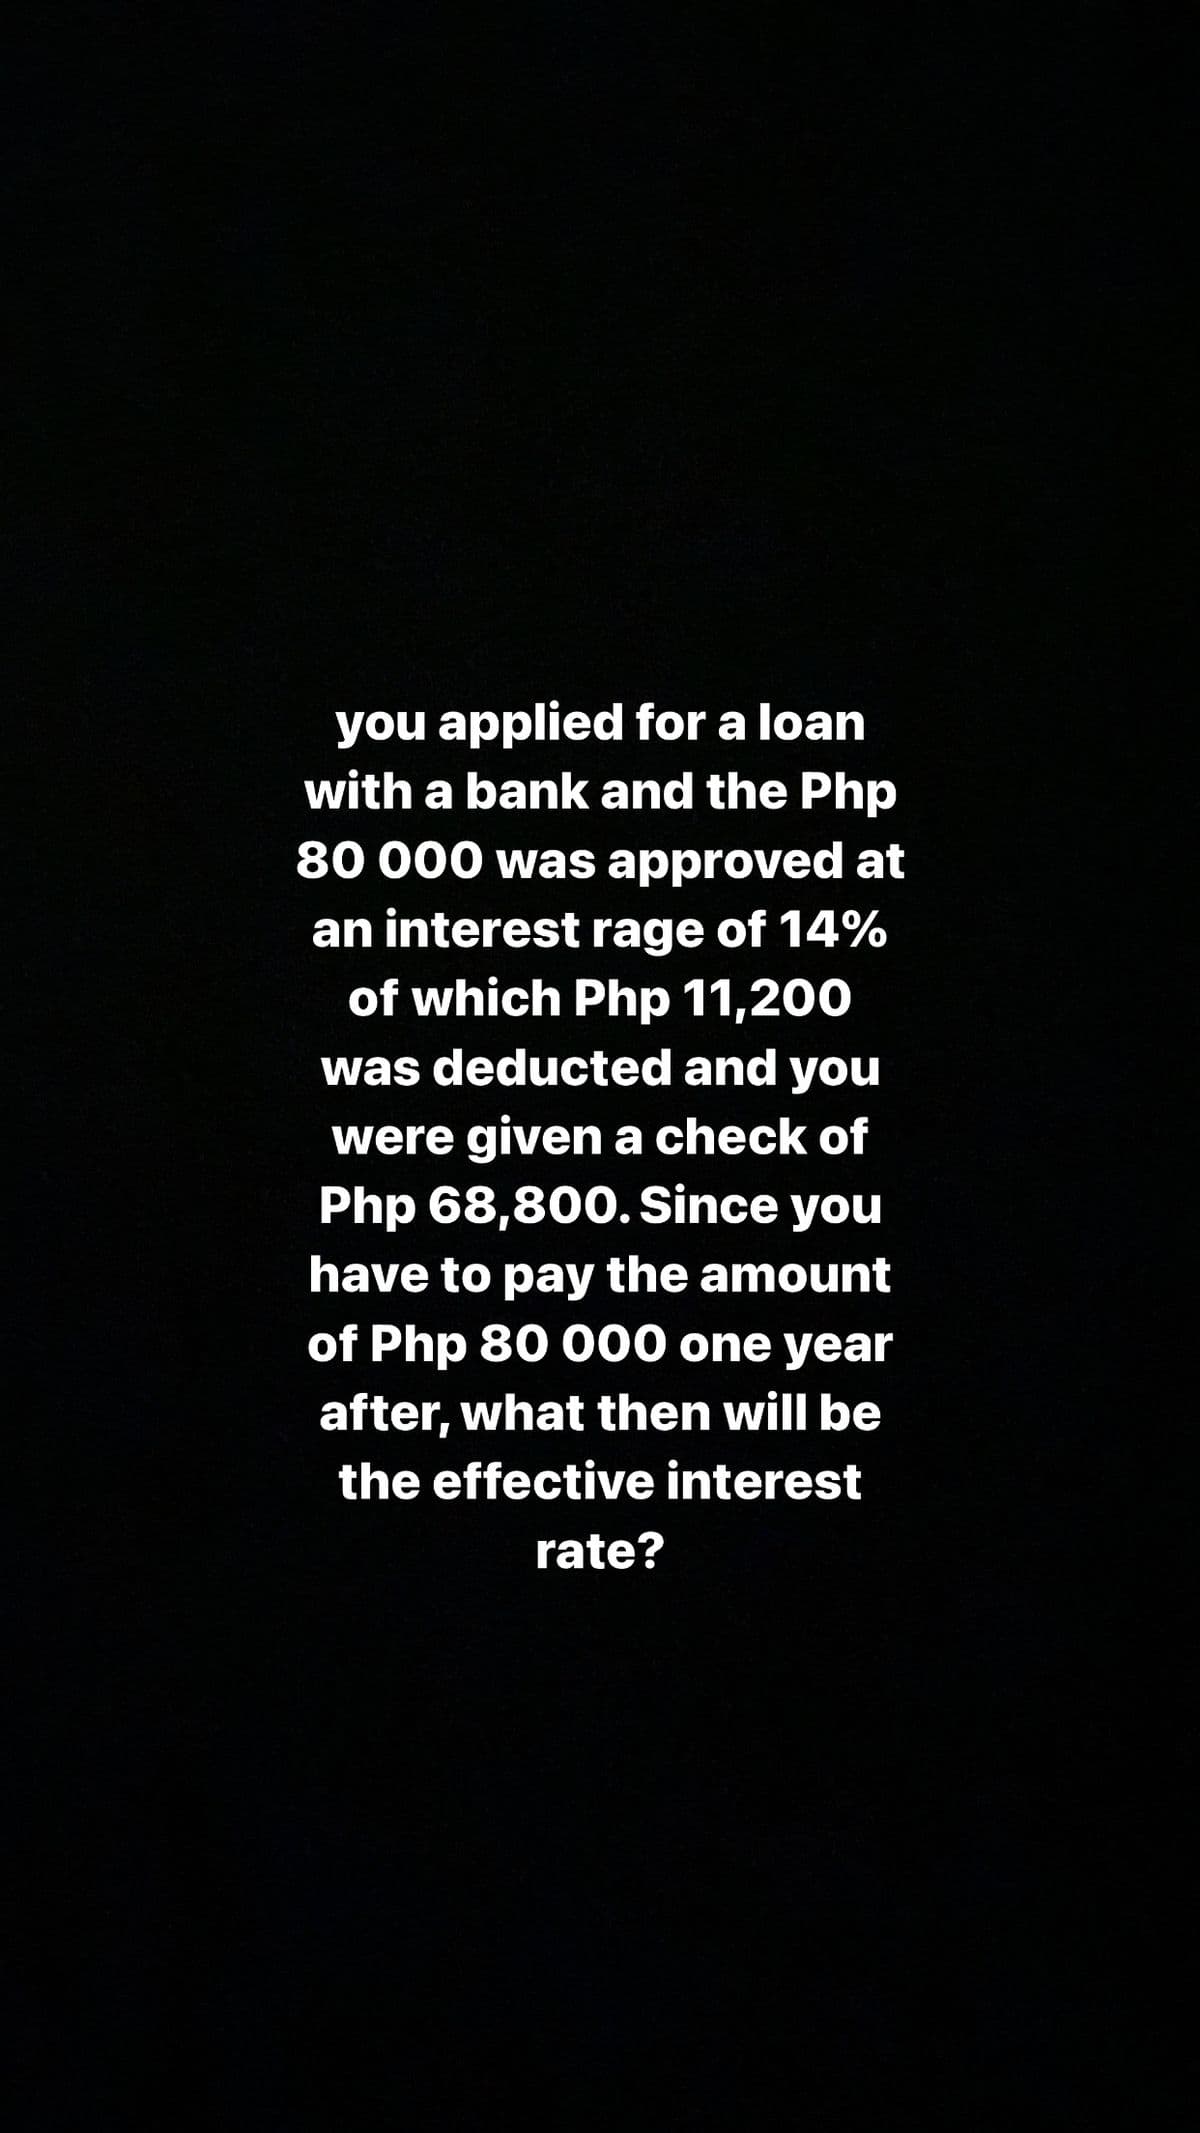 you applied for a loan
with a bank and the Php
80 000 was approved at
an interest rage of 14%
of which Php 11,200
was deducted and you
were given a check of
Php 68,800. Since you
have to pay the amount
of Php 80 000 one year
after, what then will be
the effective interest
rate?
